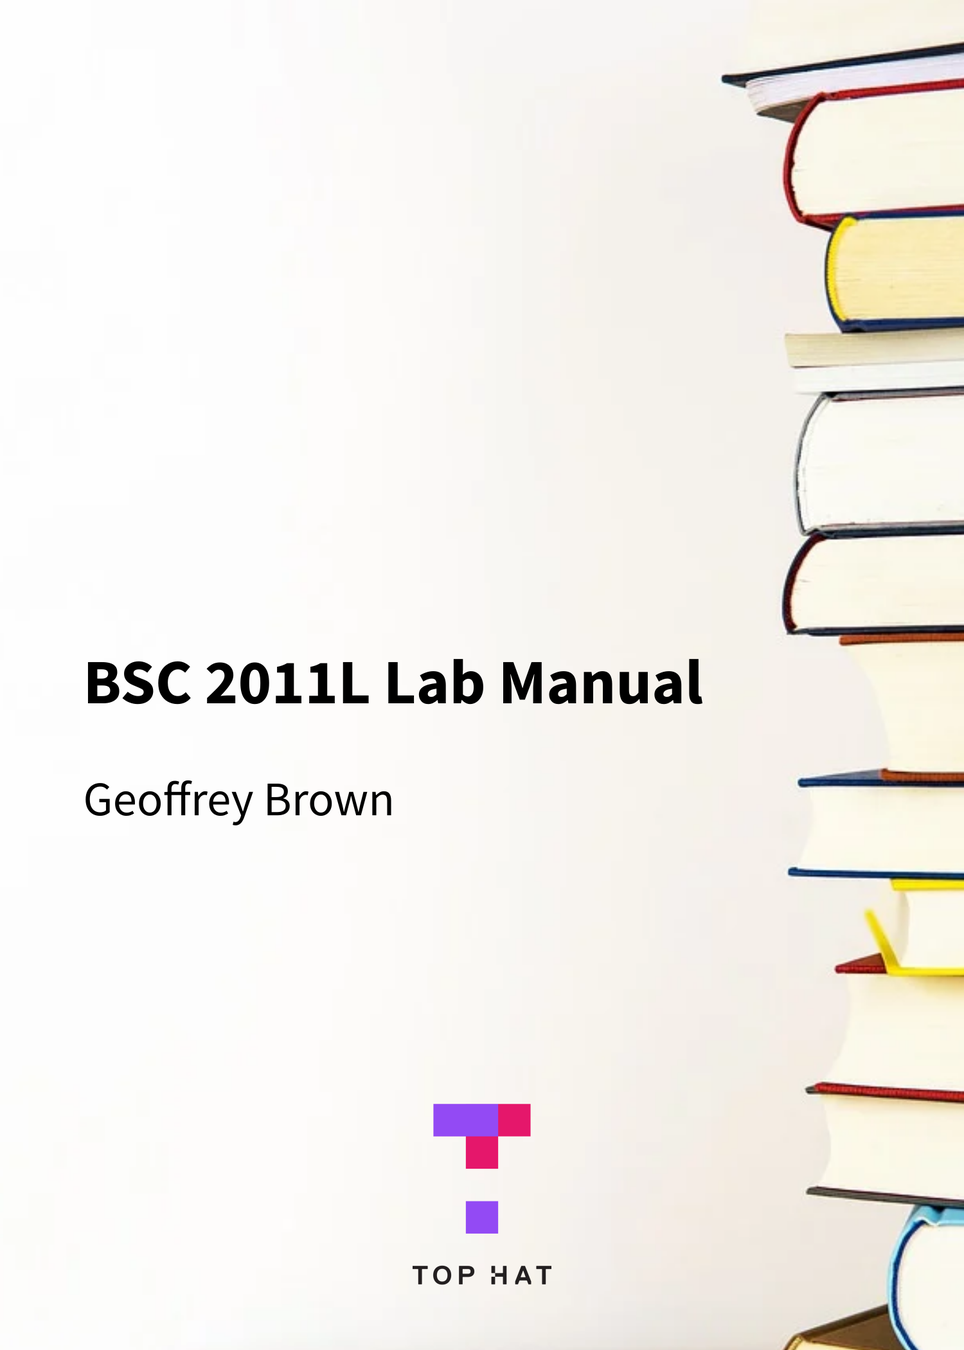 BSC 2011L Lab Manual cover photo